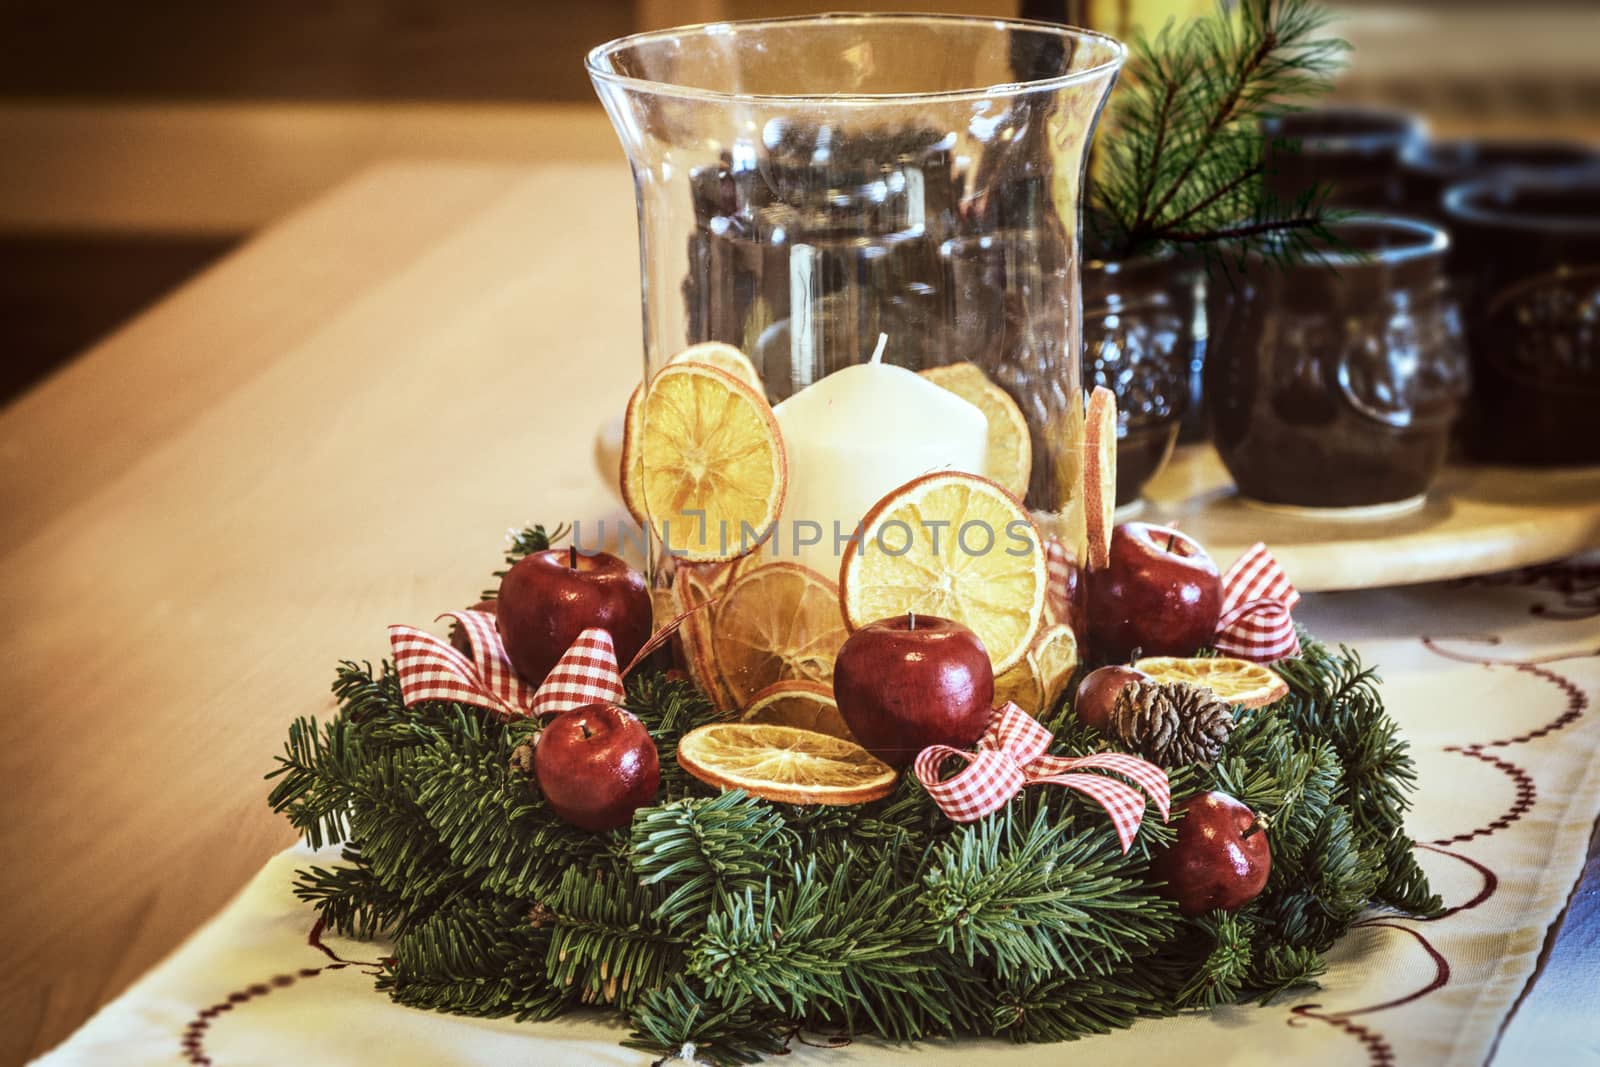 Candle in a glass vase and Christmas decoration on a wooden table